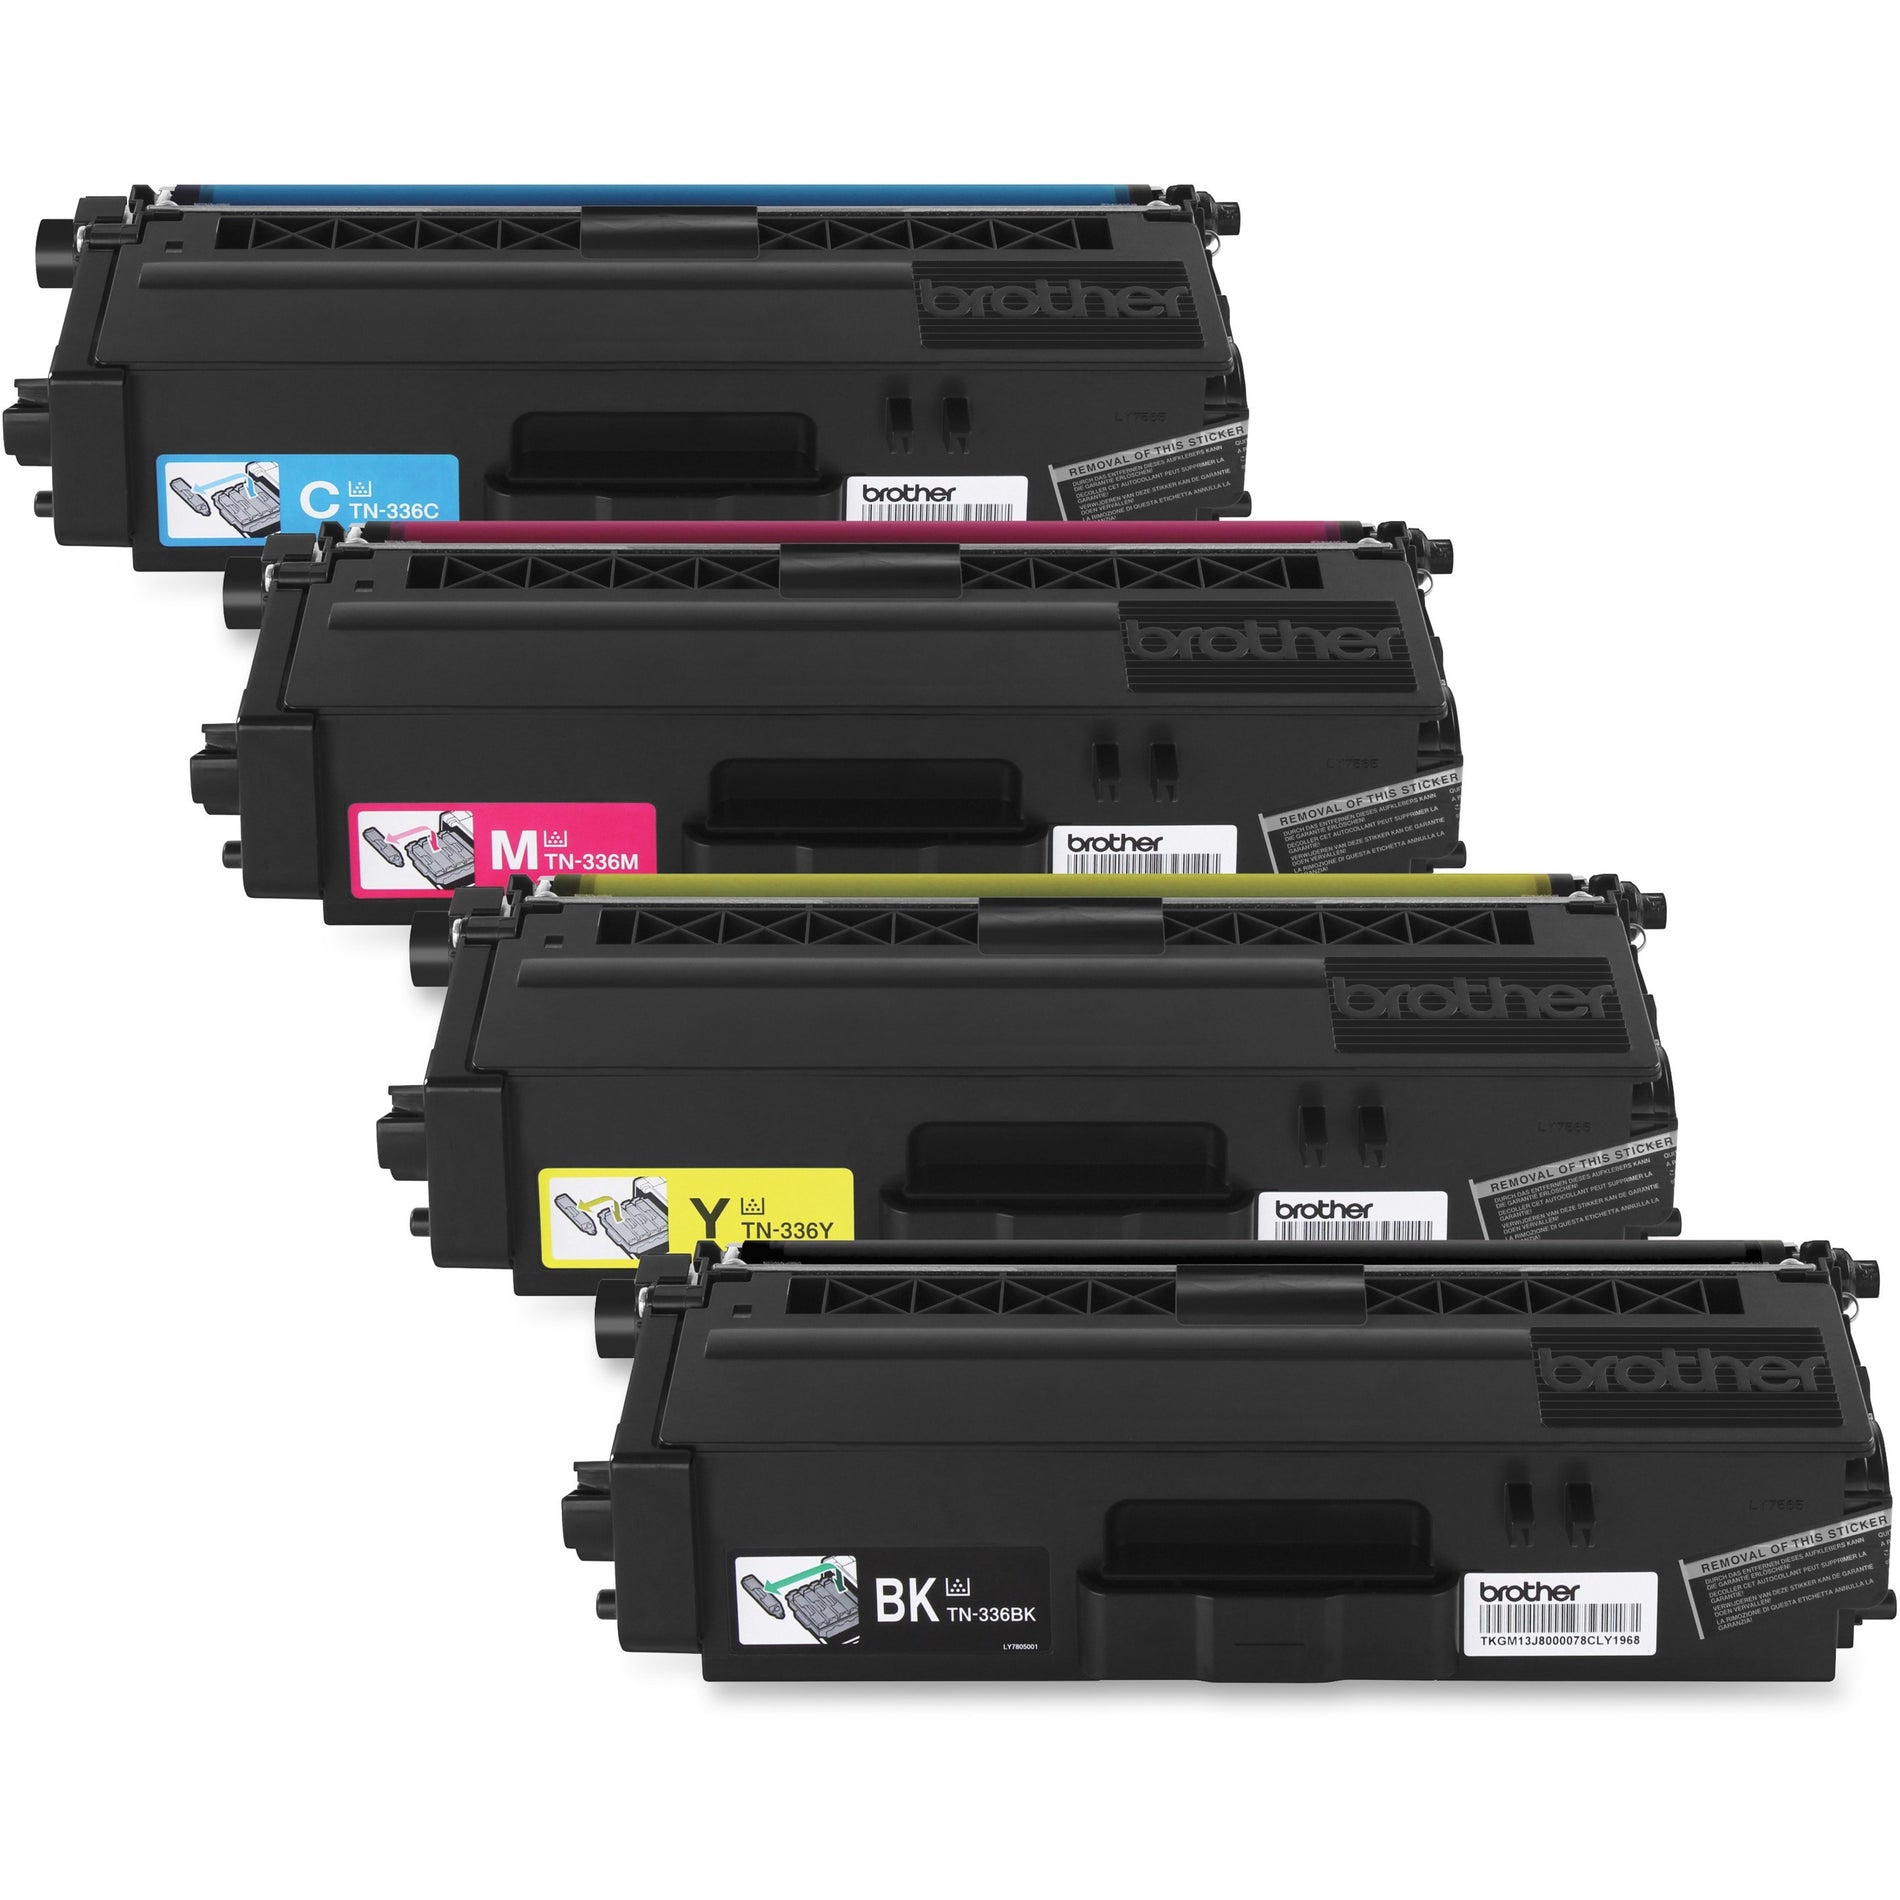 Brother TN336Y High Yield Yellow Toner Cartridge, 3500 Pages